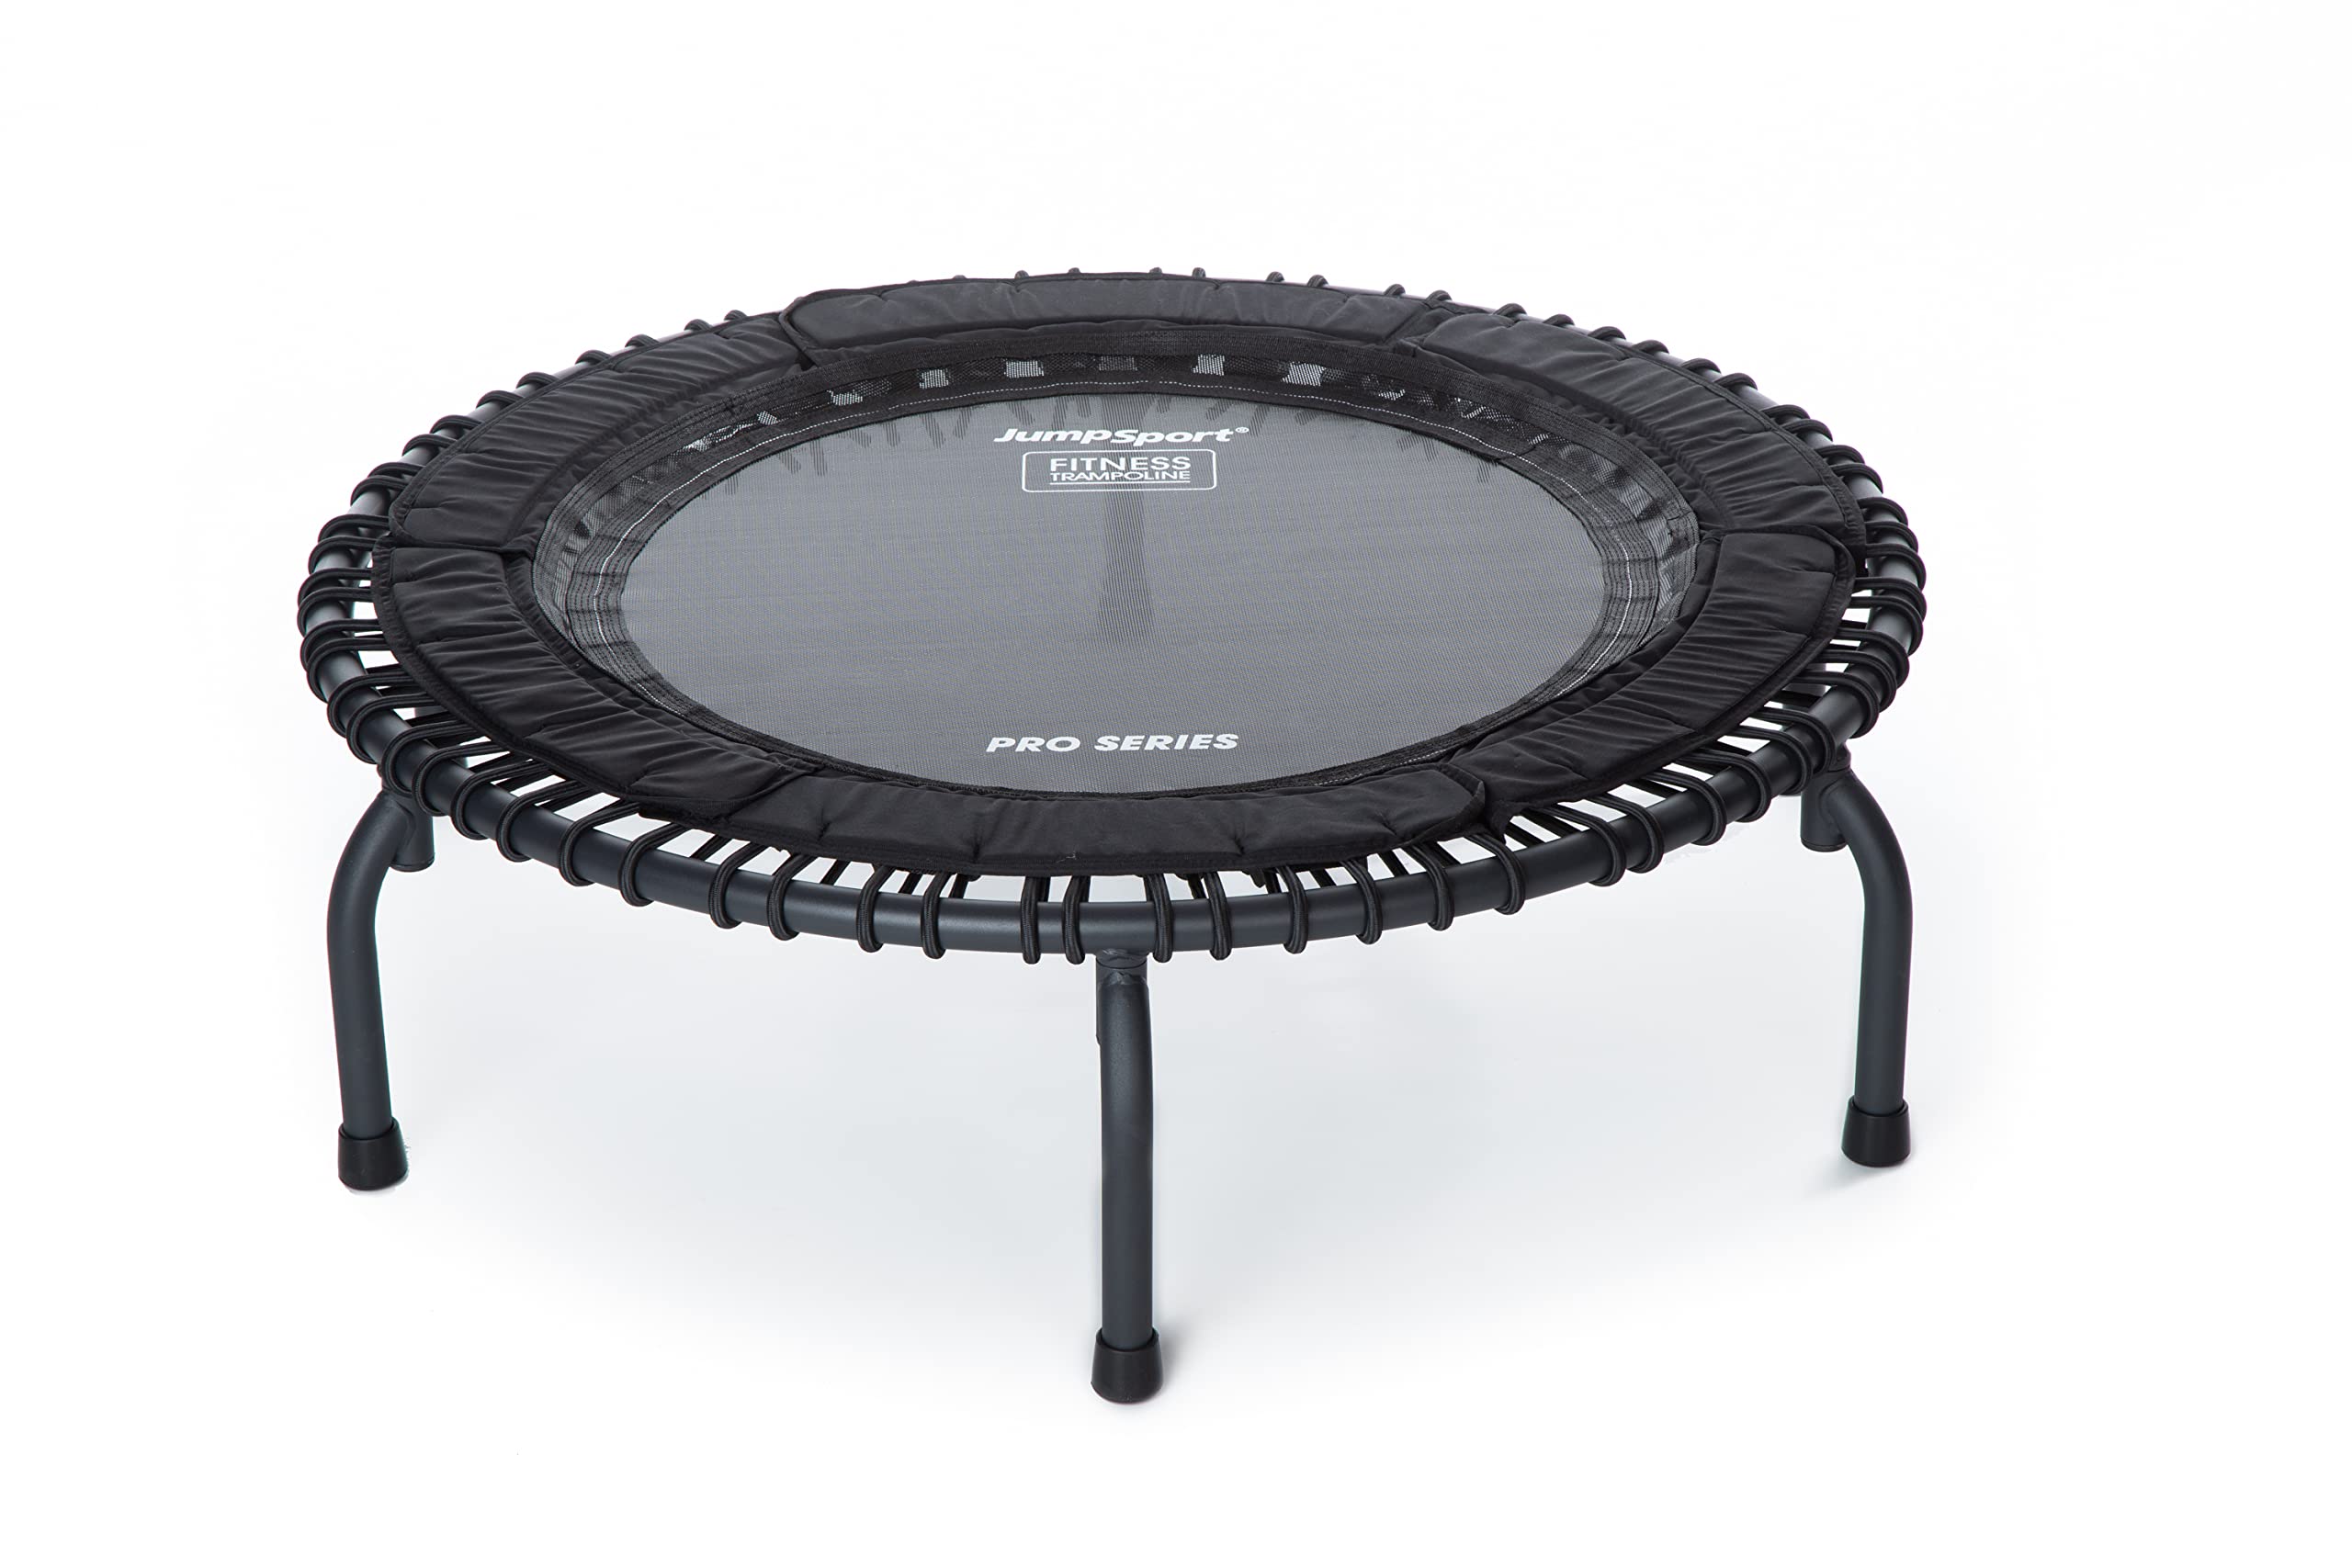 JumpSport 550f/570 PRO Large Diameter Heavy Duty Fitness Trampoline, 44-inch | Extra Firm Bungees with 7 Settings | 325 lb Wt. Rating | Extended 60-Day Free Streaming Trial